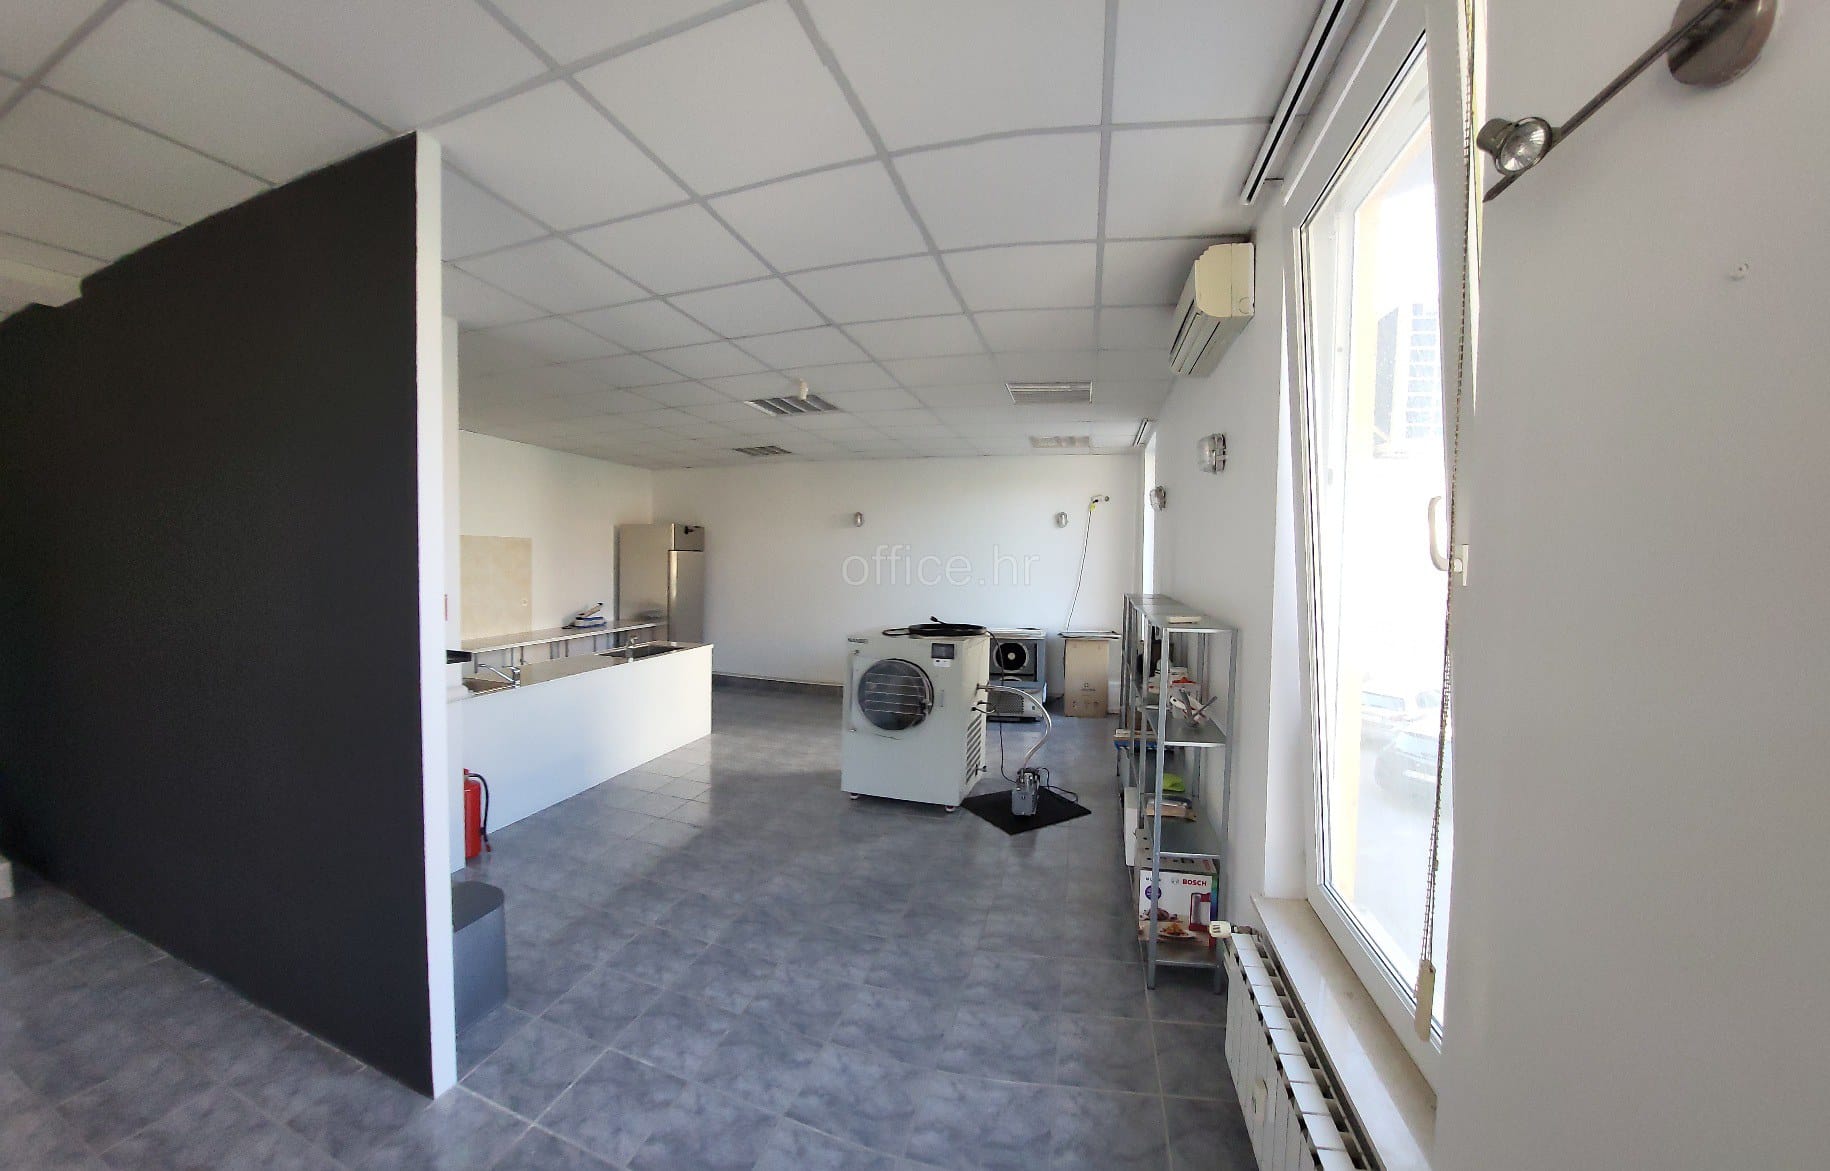 Zagreb south, office space for rent, 75 sqm, 6€/sqm, 5 parking spaces